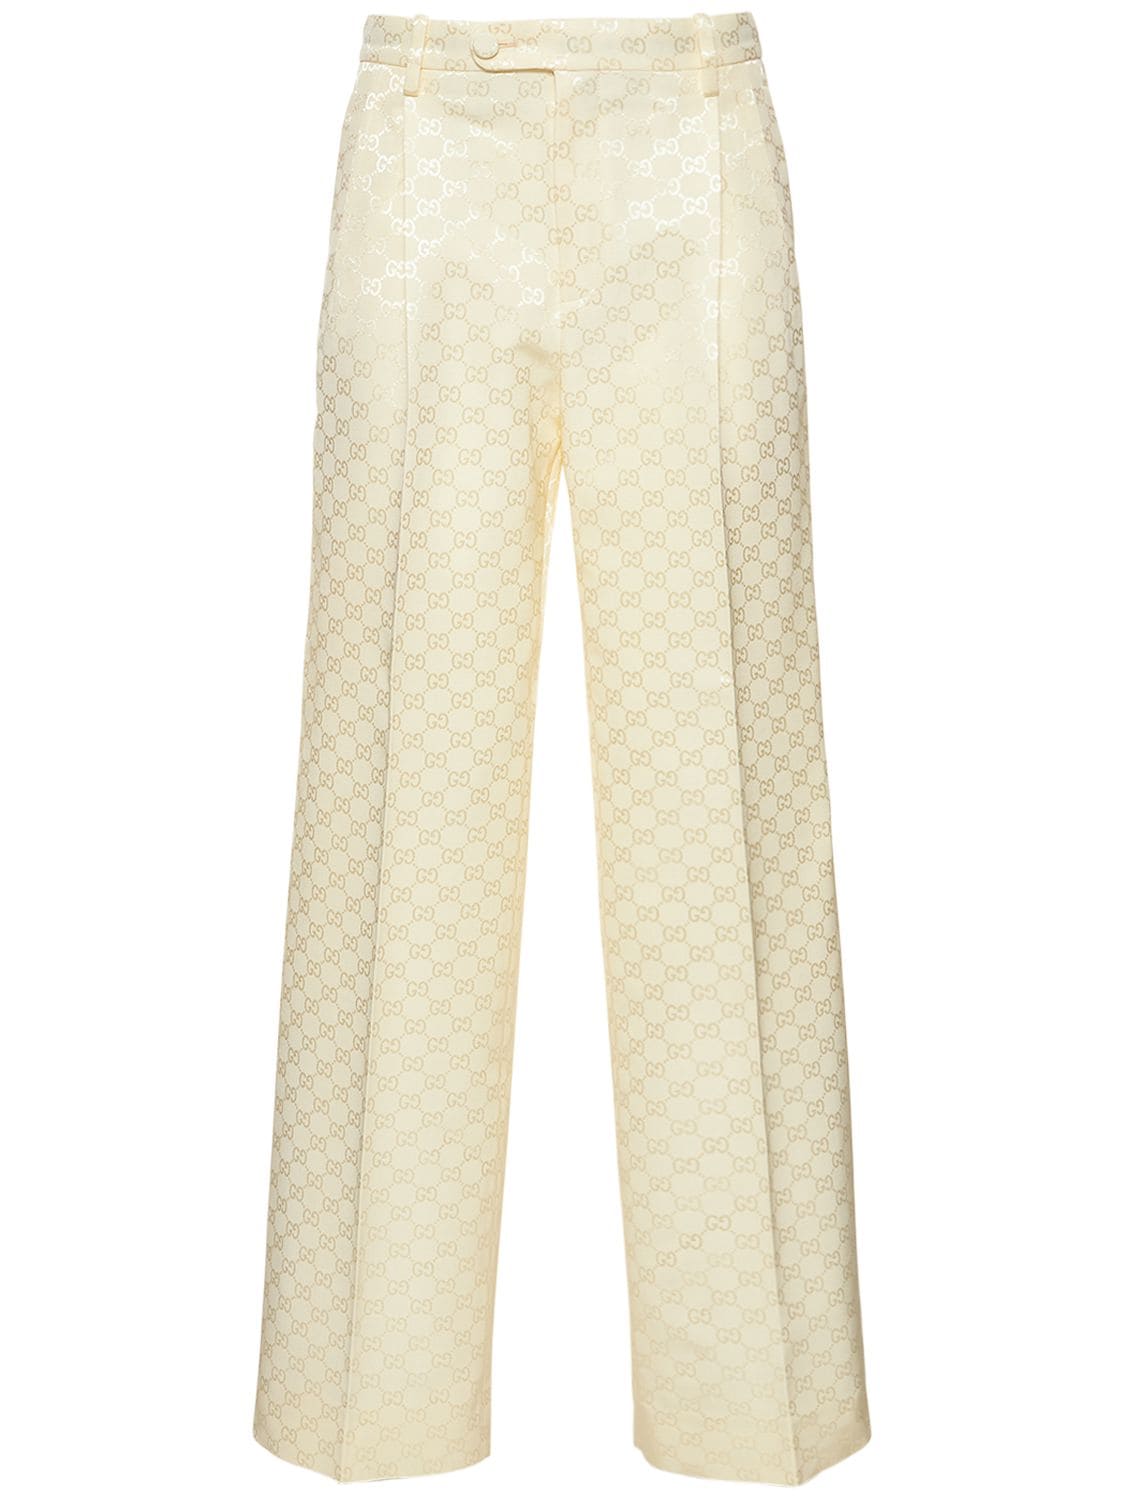 Gucci Gg Cotton Blend Pants In Baby Cream